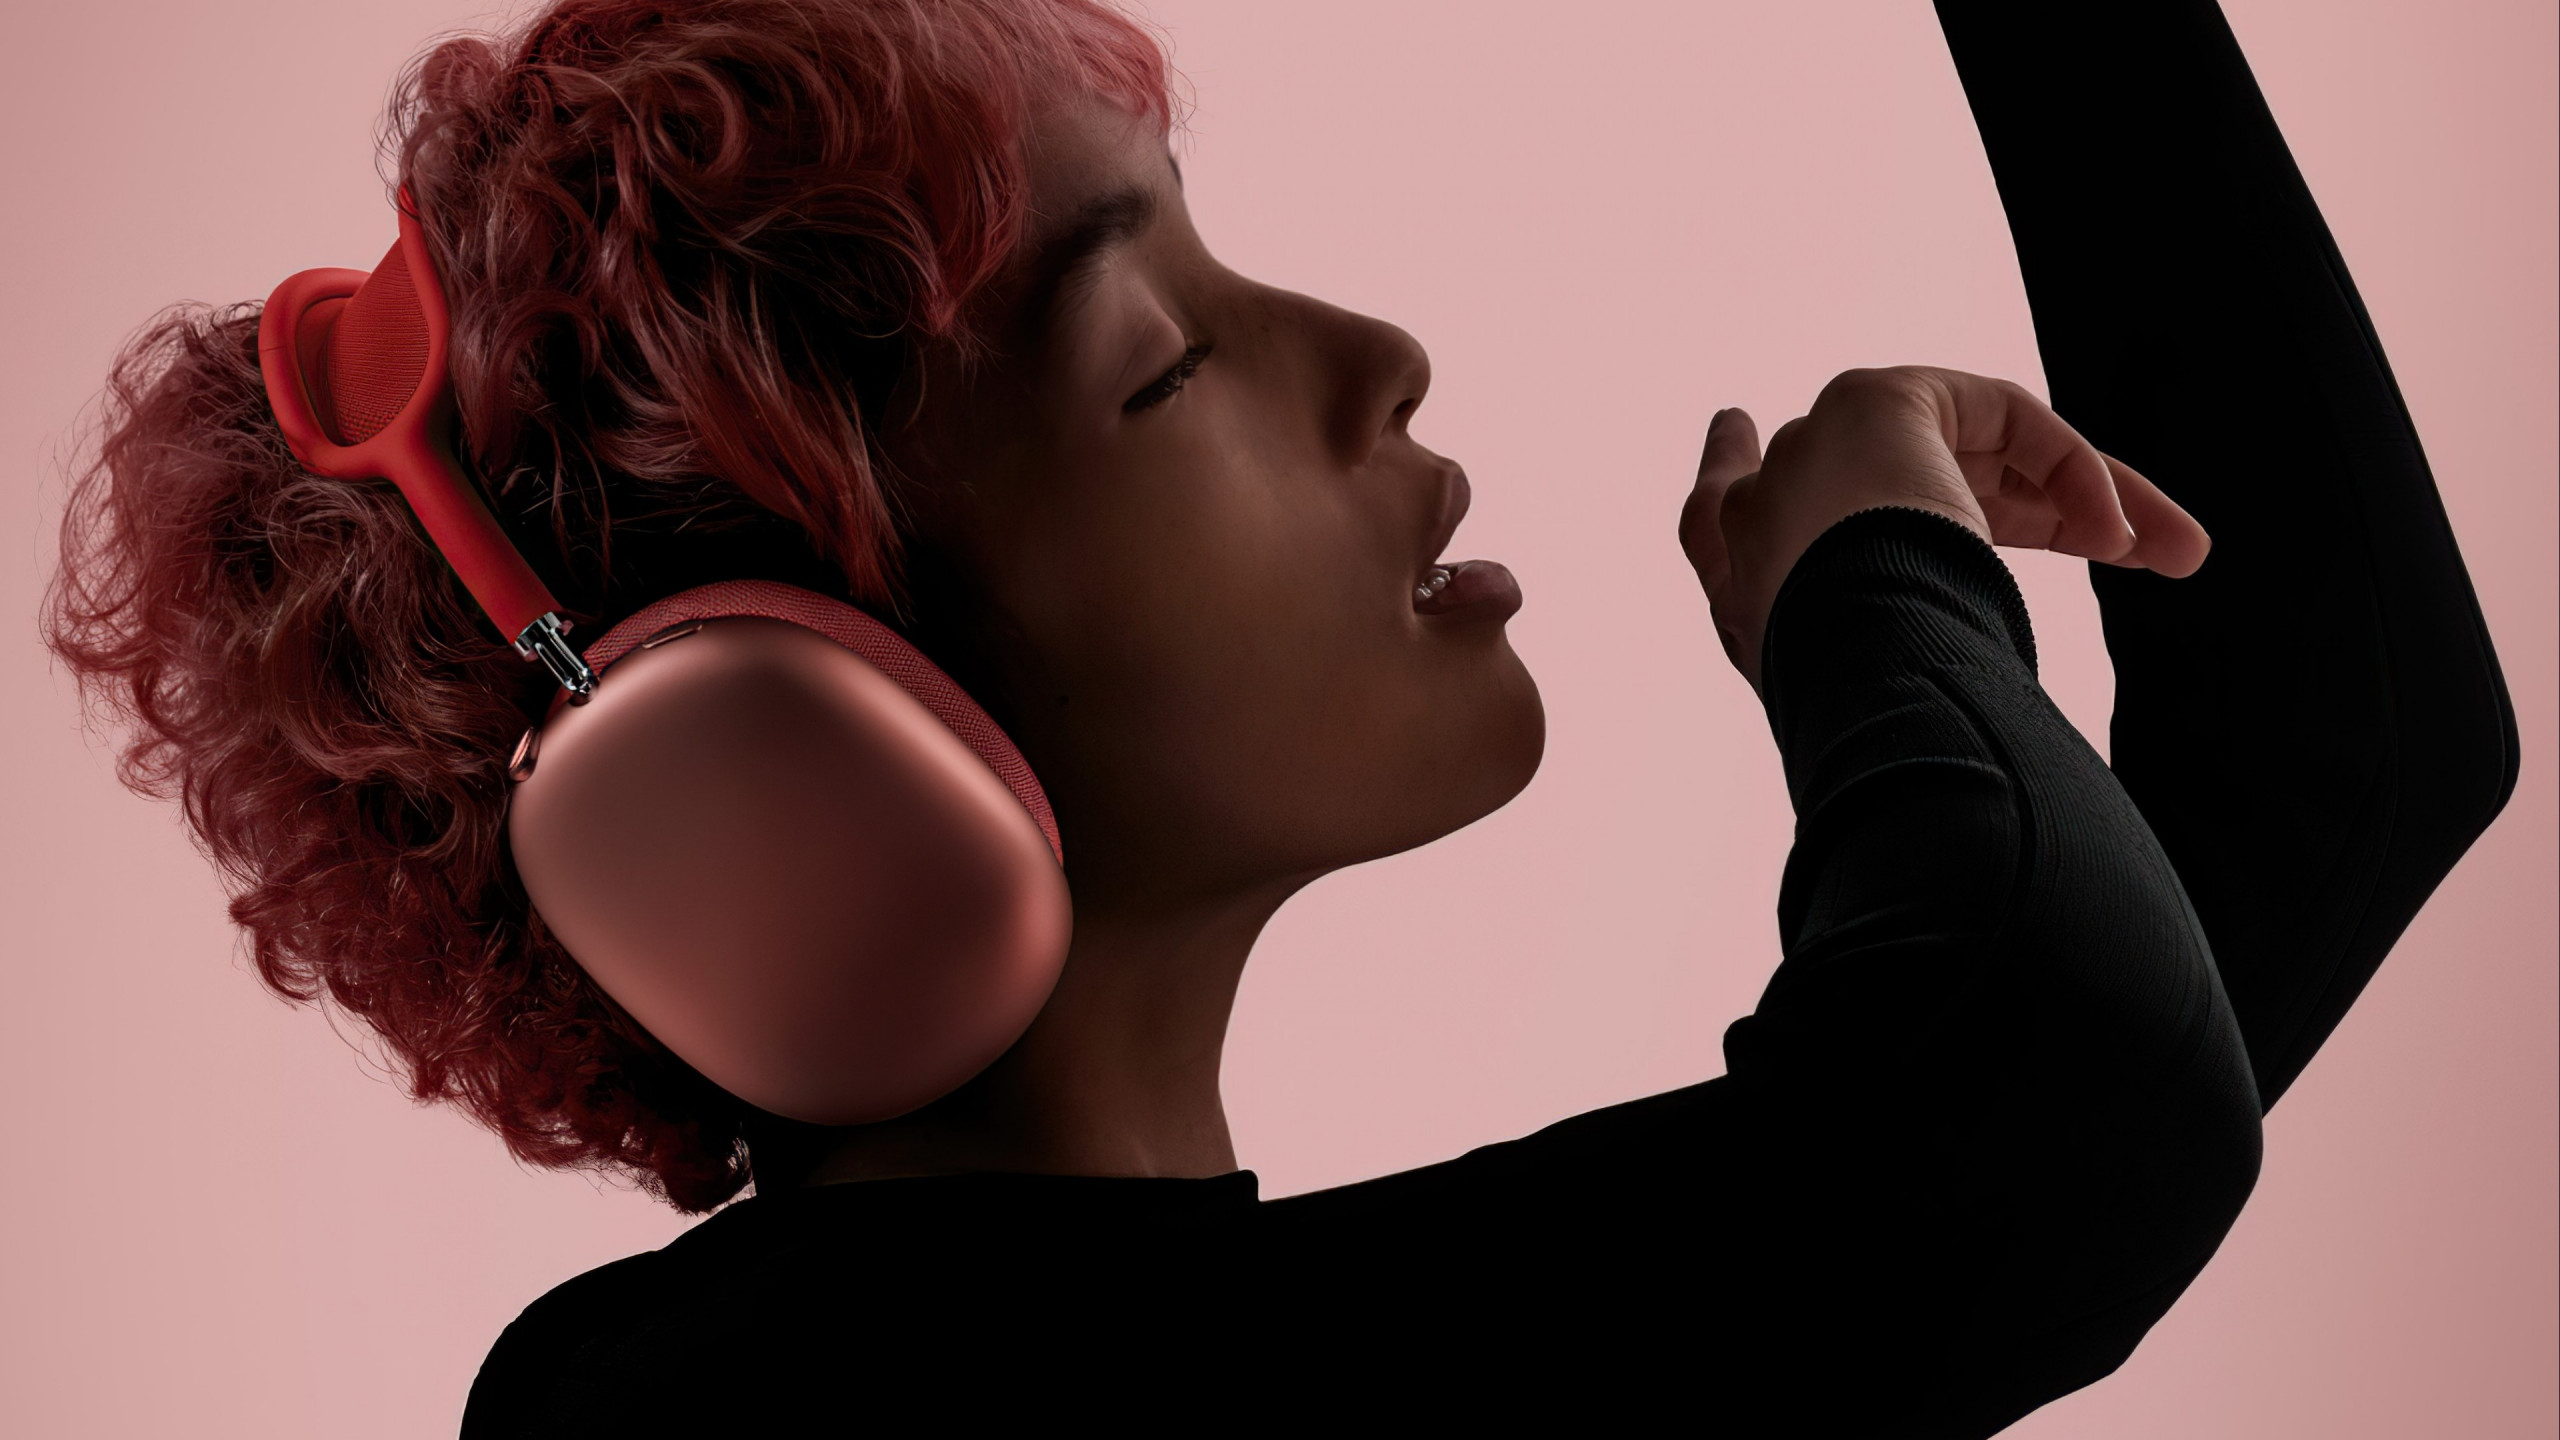 Lady with AirPods Max wallpaper 2560x1440